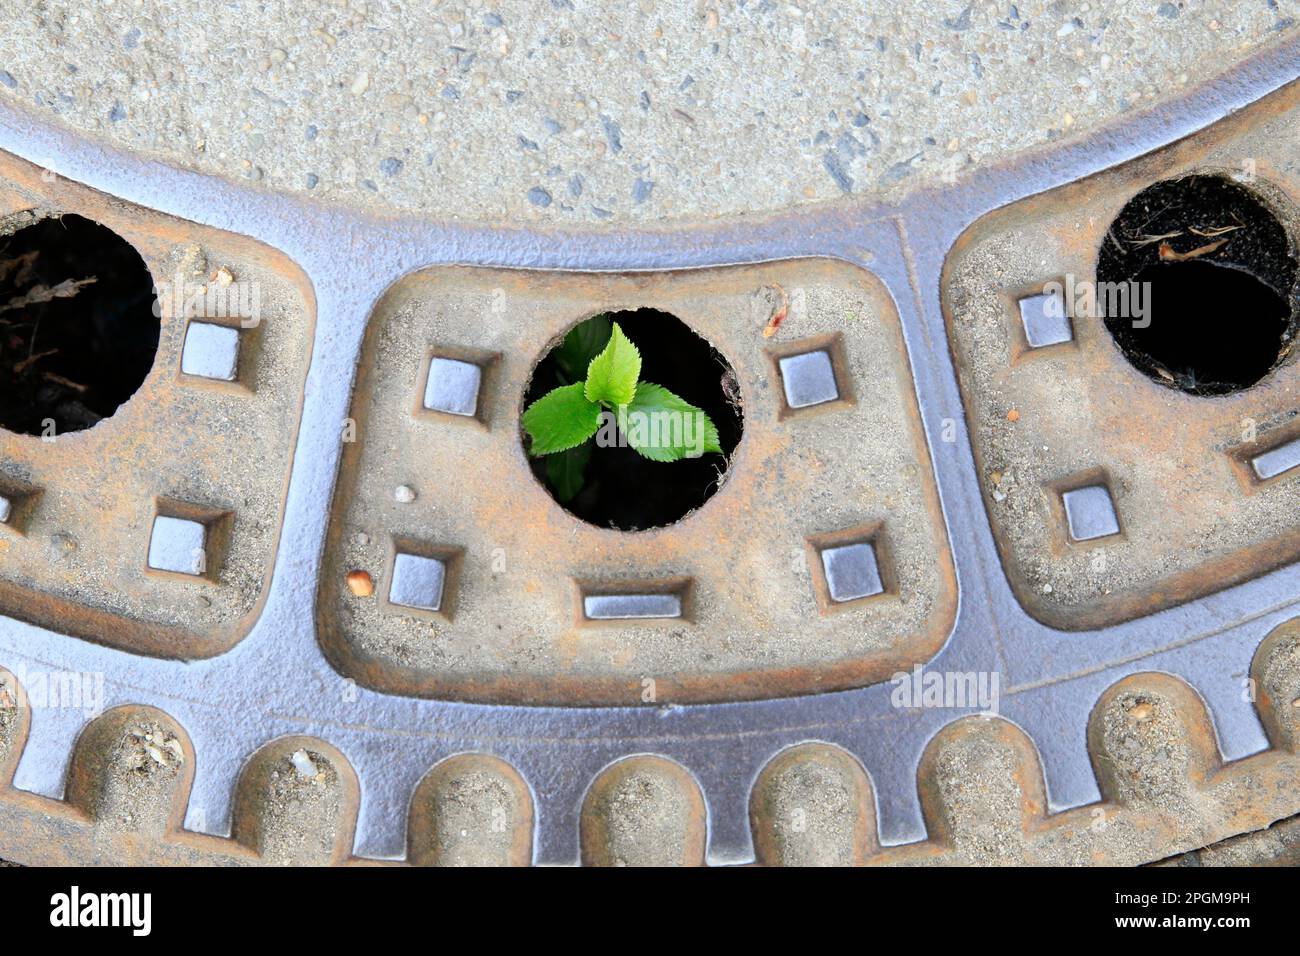 Kleine Pflanze im Gullideckel, Small plant in the manhole cover Stock Photo